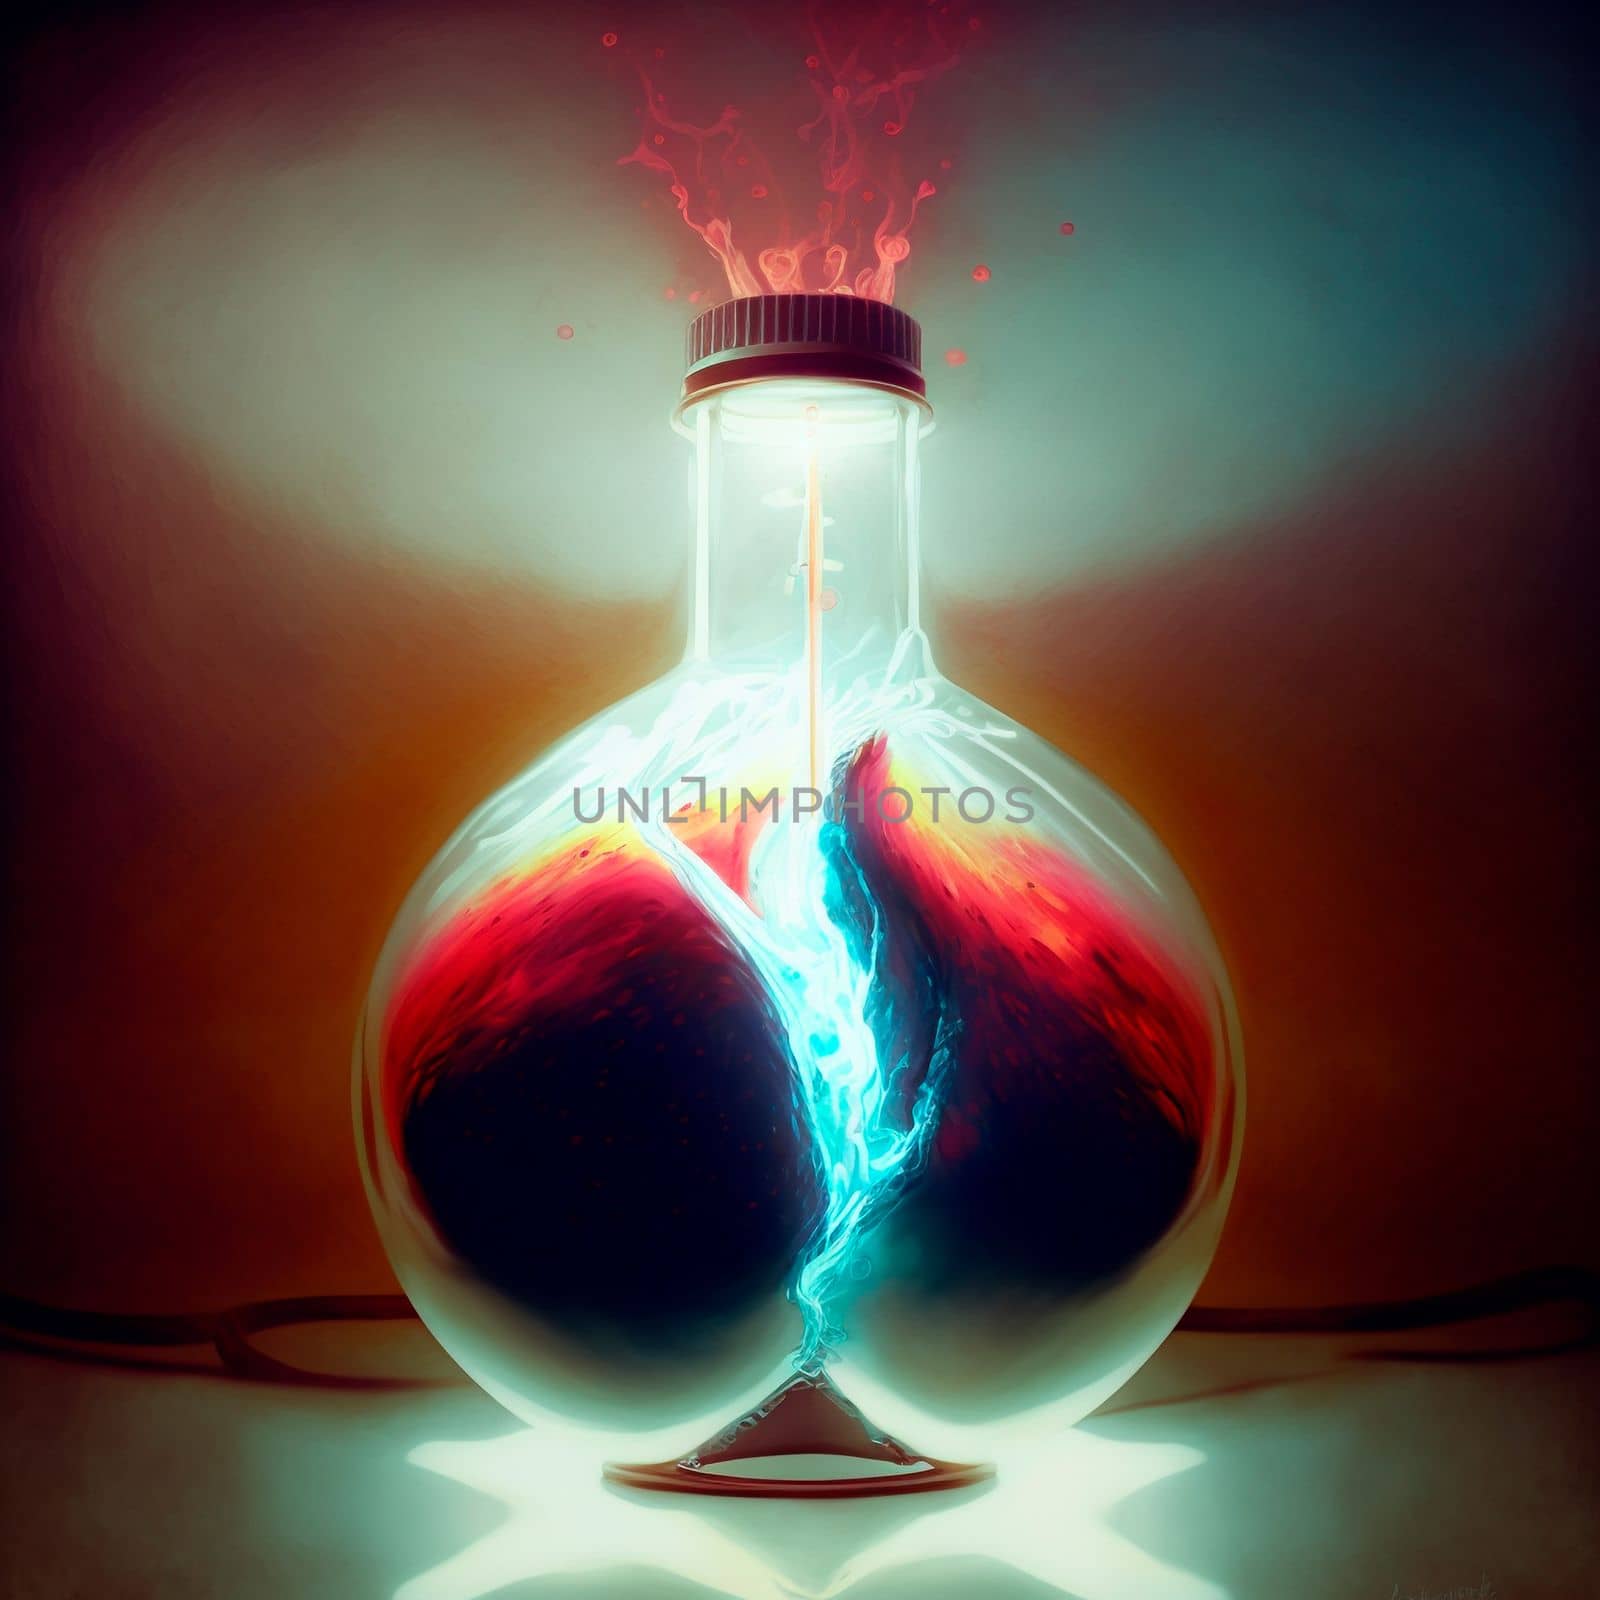 Abstract image of a phial with a magic potion. High quality illustration